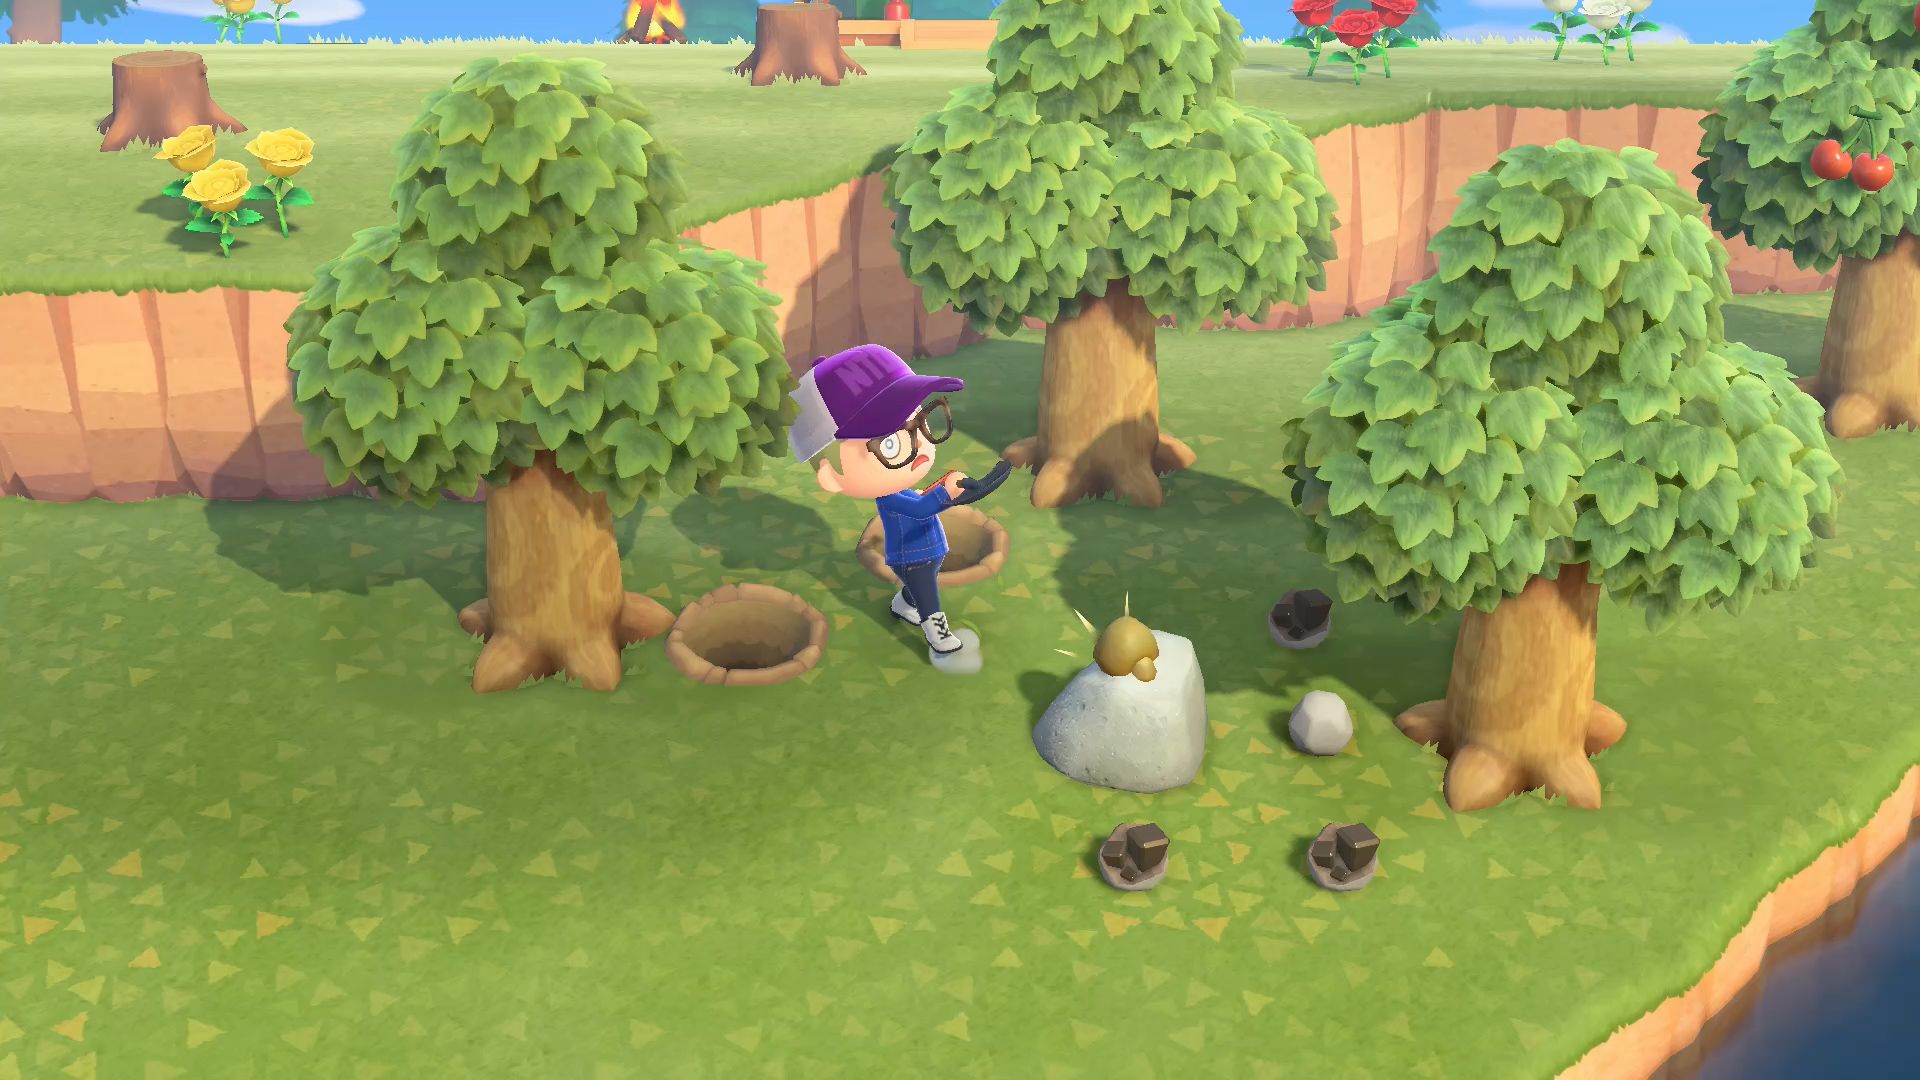 10 Games To Play With Online Friends In Animal Crossing: New Horizons